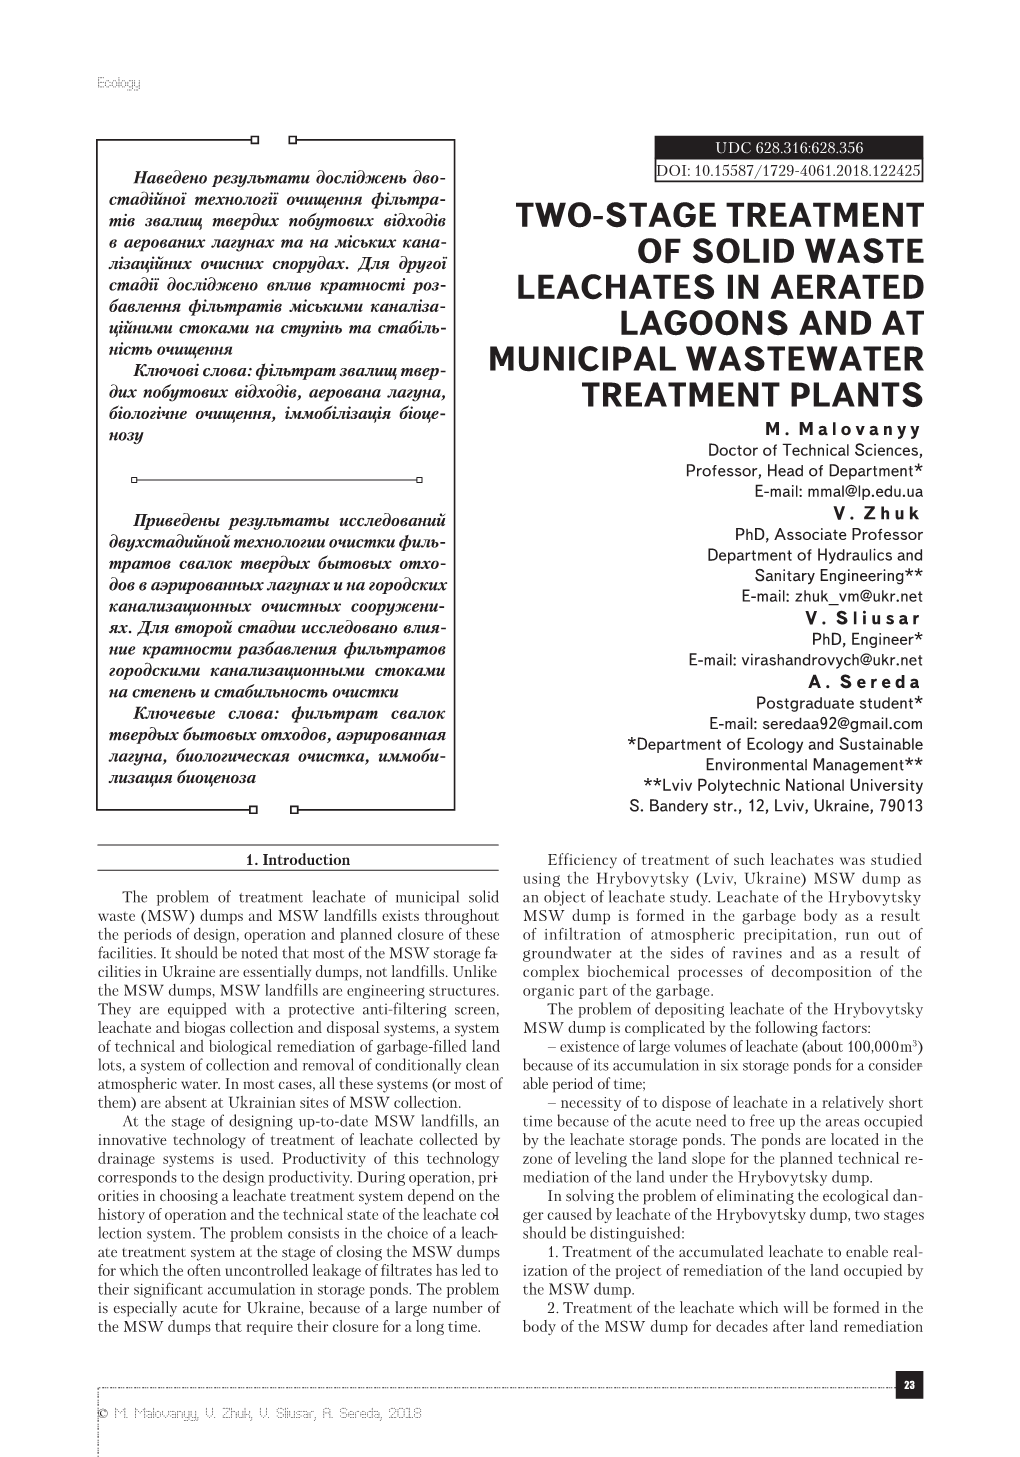 Two-Stage Treatment of Solid Waste Leachates in Aerated Lagoons and At